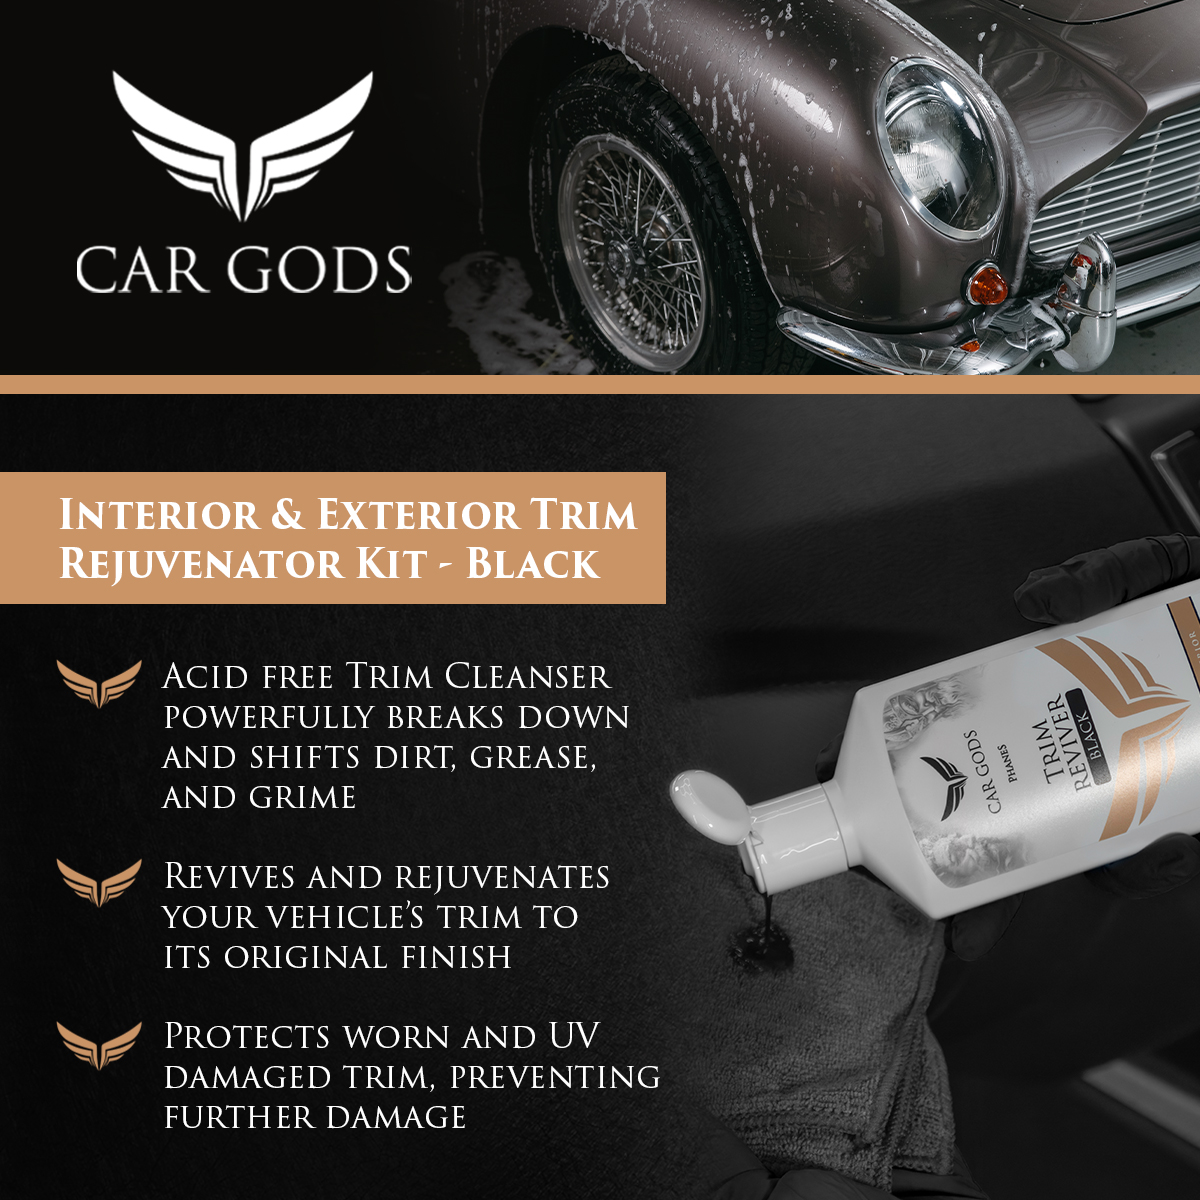 Car Gods Black Trim Reviver Kit. Acid-free Trim Cleanser designed to powerfully breaks down and shifts dirt, grease and grime, reviving your vehicle’s trim to the original finish. The Trim reviver is designed to protect worn and UV damaged trim.